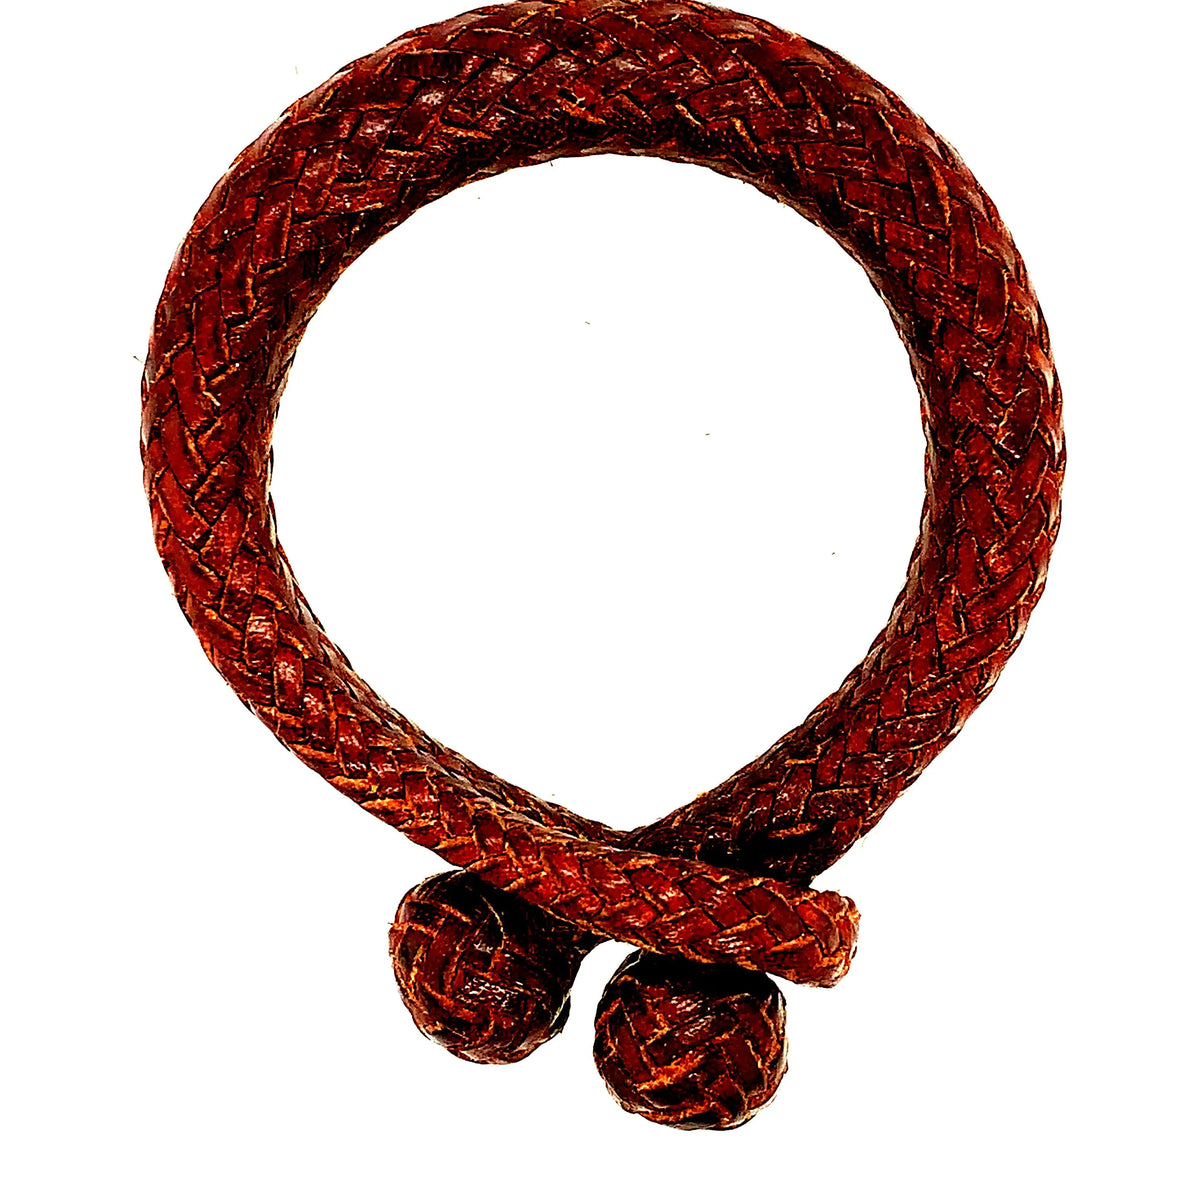 Single Hand Braided Dark Brown Leather Bracelet  Native American Artist: Aaron Lopez  Circumference: 6.5 inches